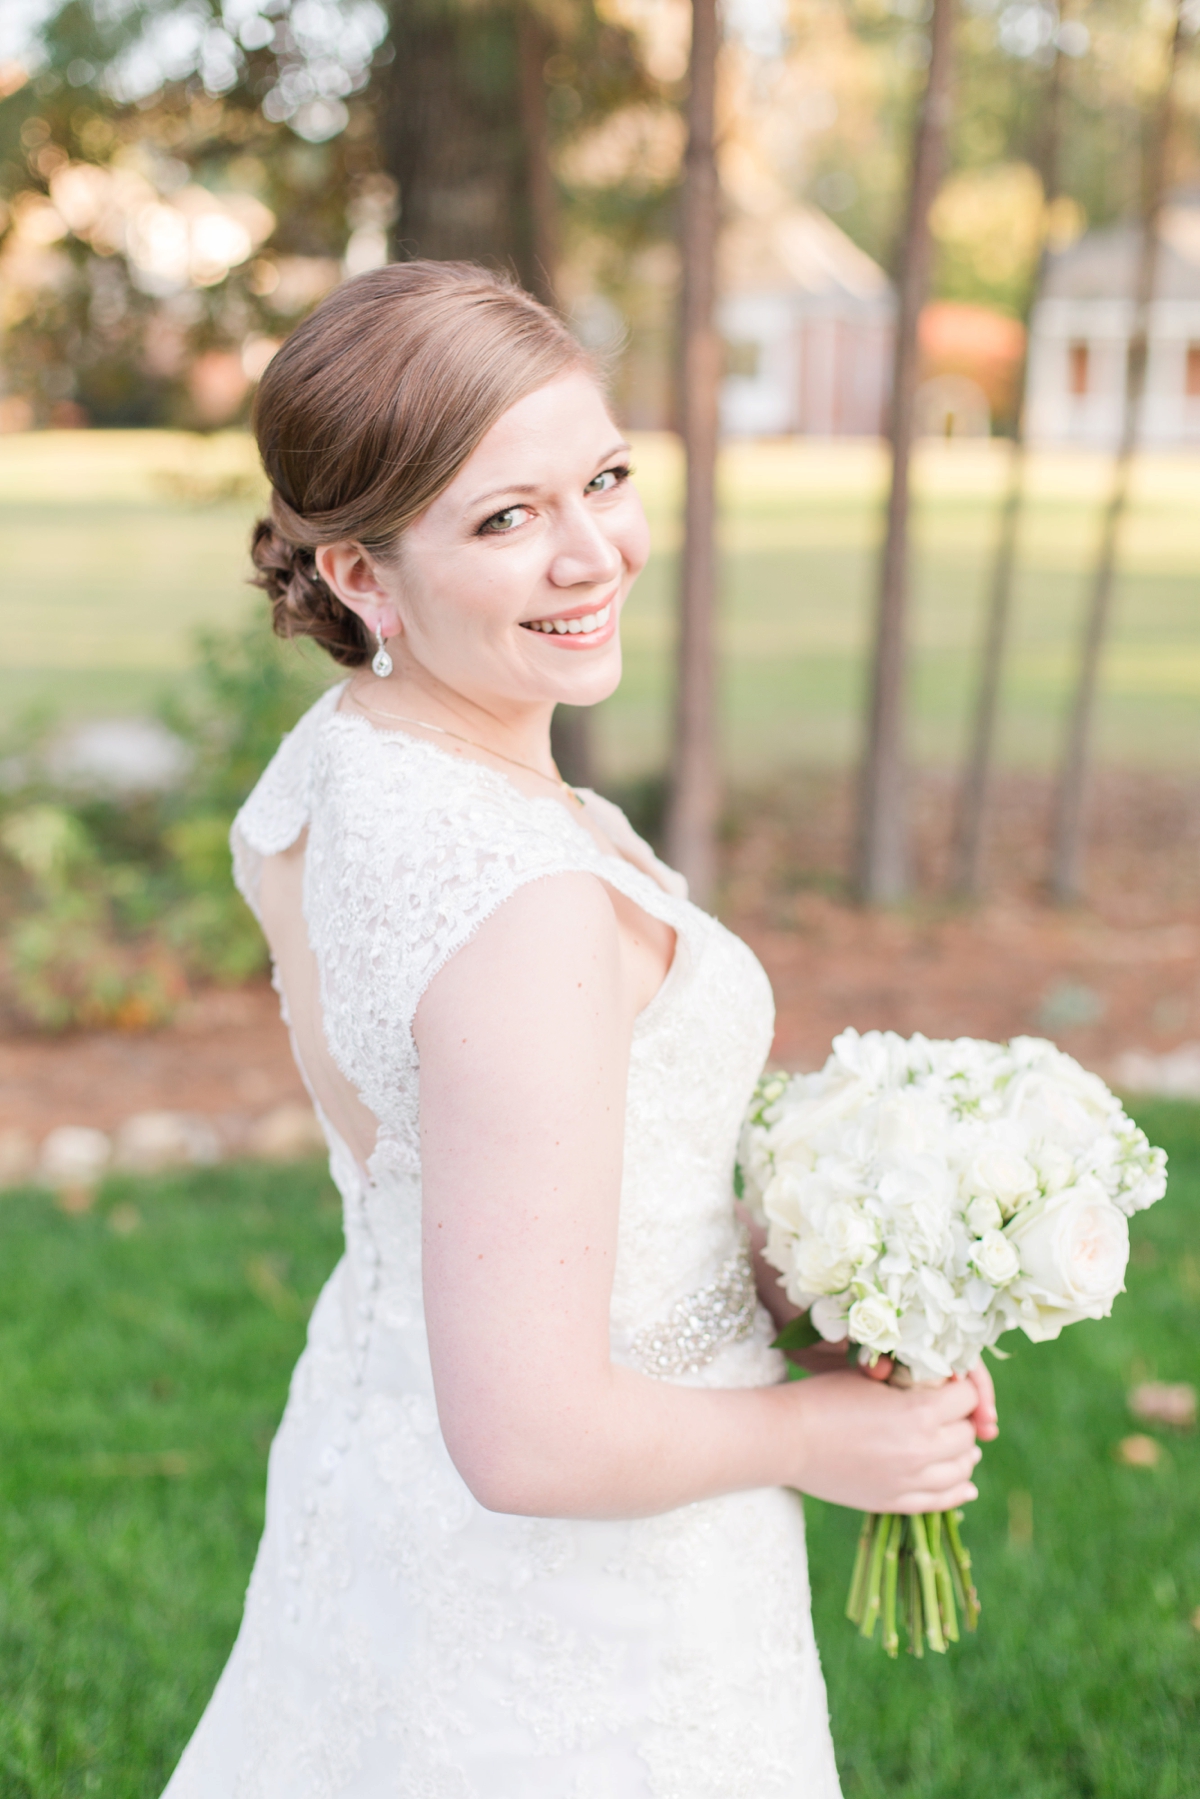 Williamsburg Bridal Portraits by Angie McPherson Photography